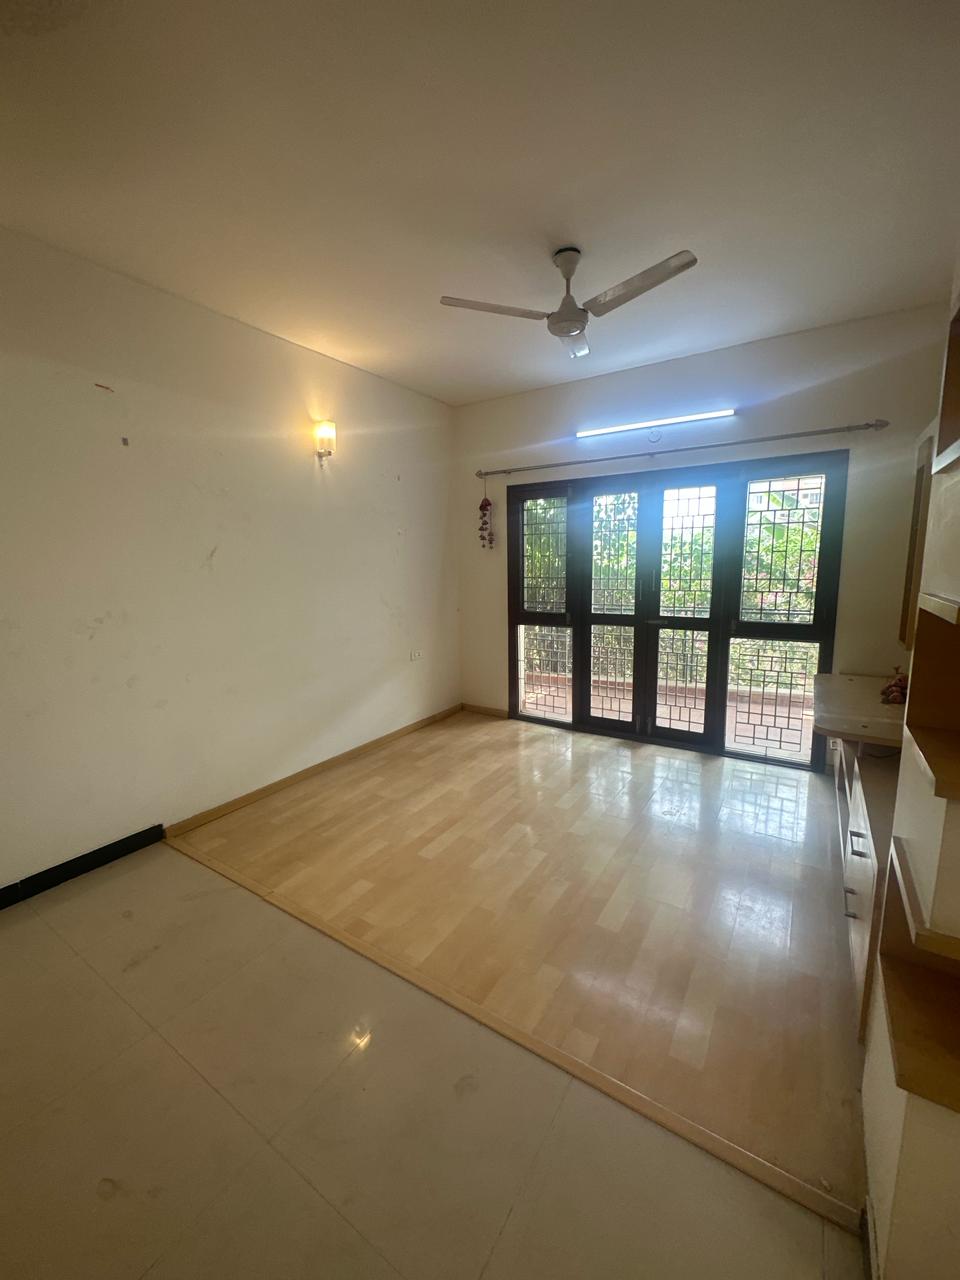 2 BHK Independent House for Lease Only at JAML2 - 4080 in Garvebhavipalya